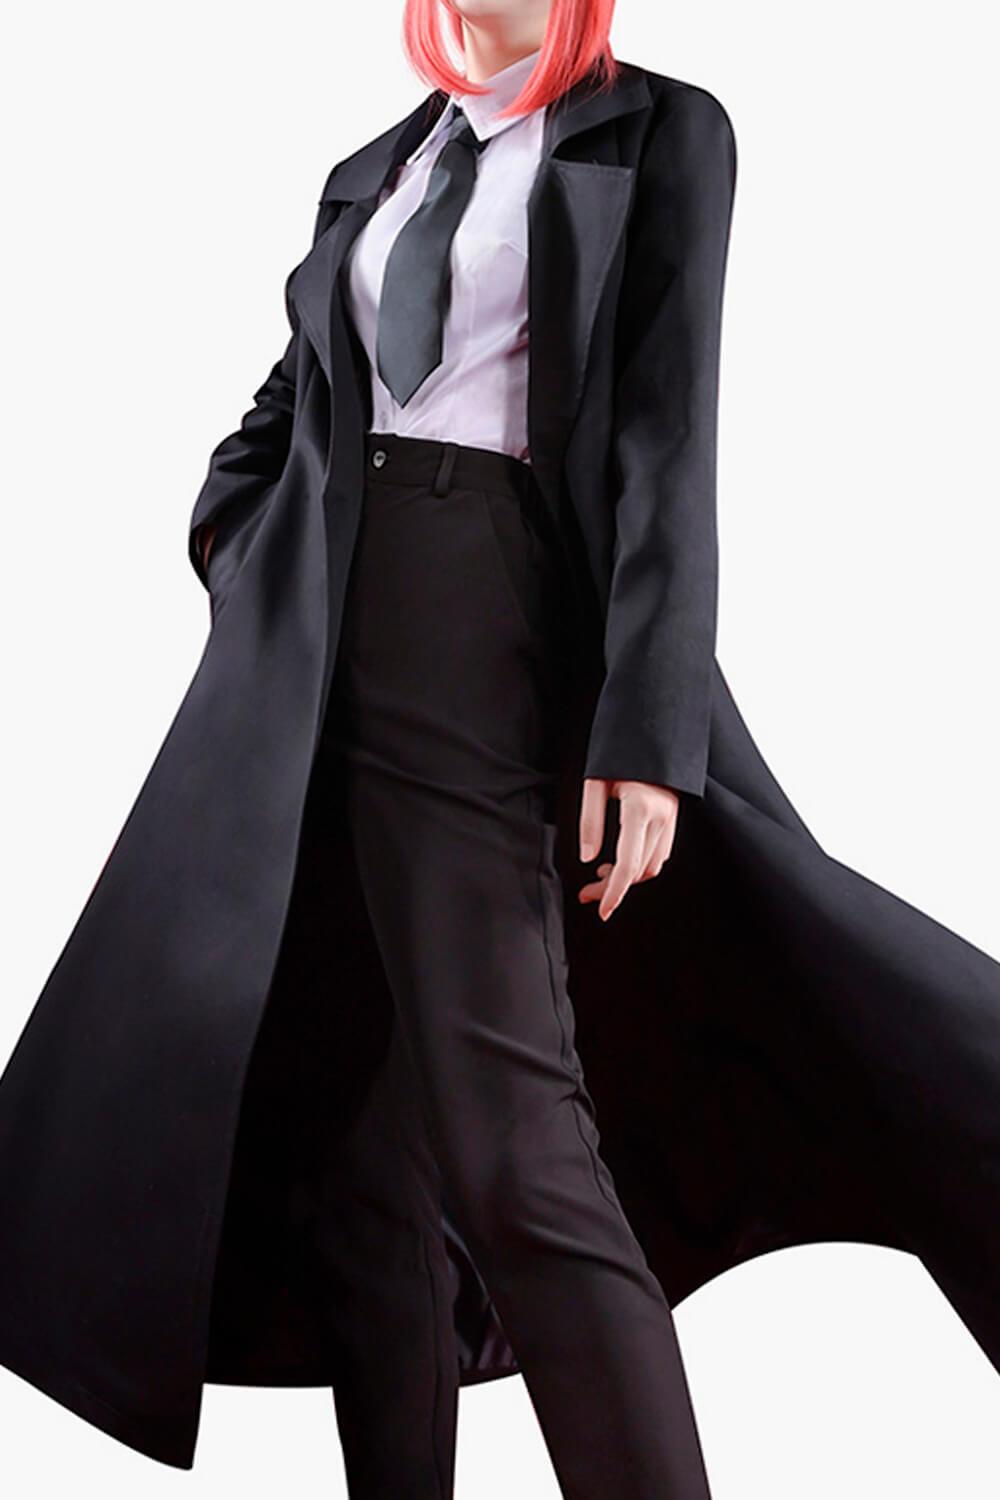 Makima Trench Coat and Suit Chainsaw Man Cosplay Outfit - Aesthetic Clothes Shop